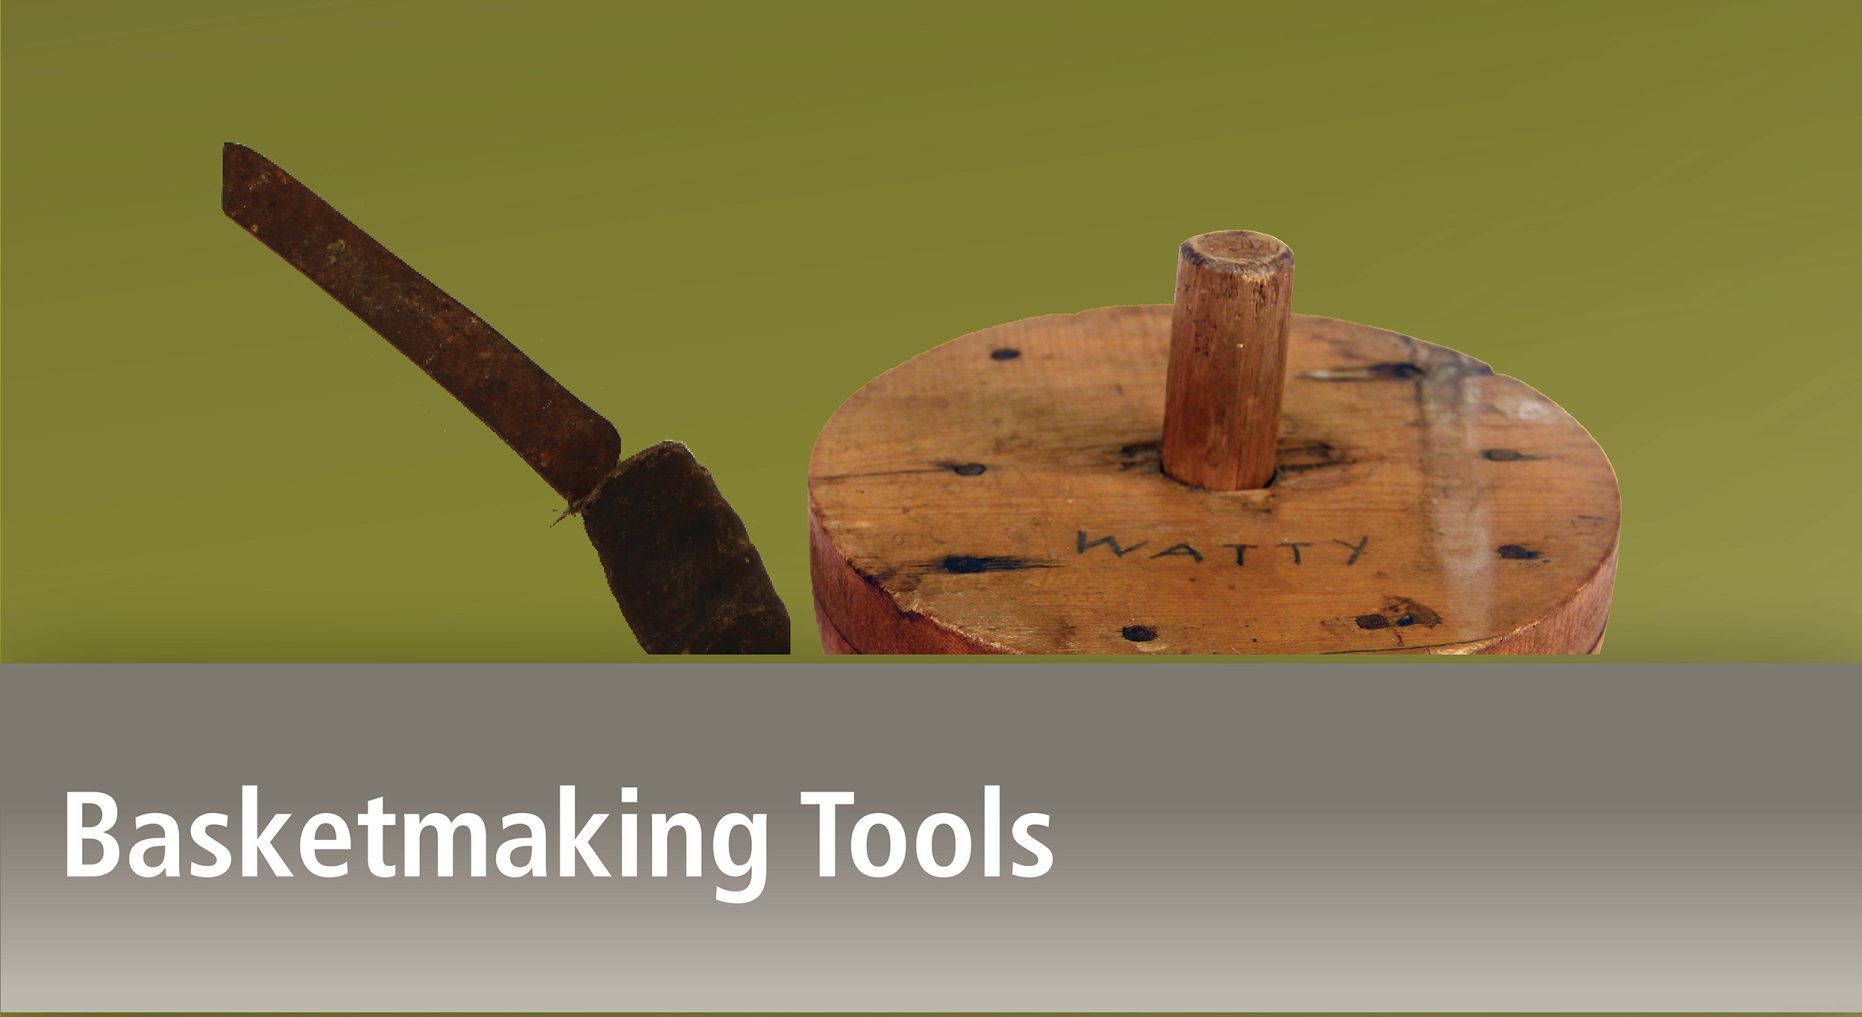 Image of crooked knife and wooden basket block with name "Watty" inscribed on it above title Basketmaking Tools.